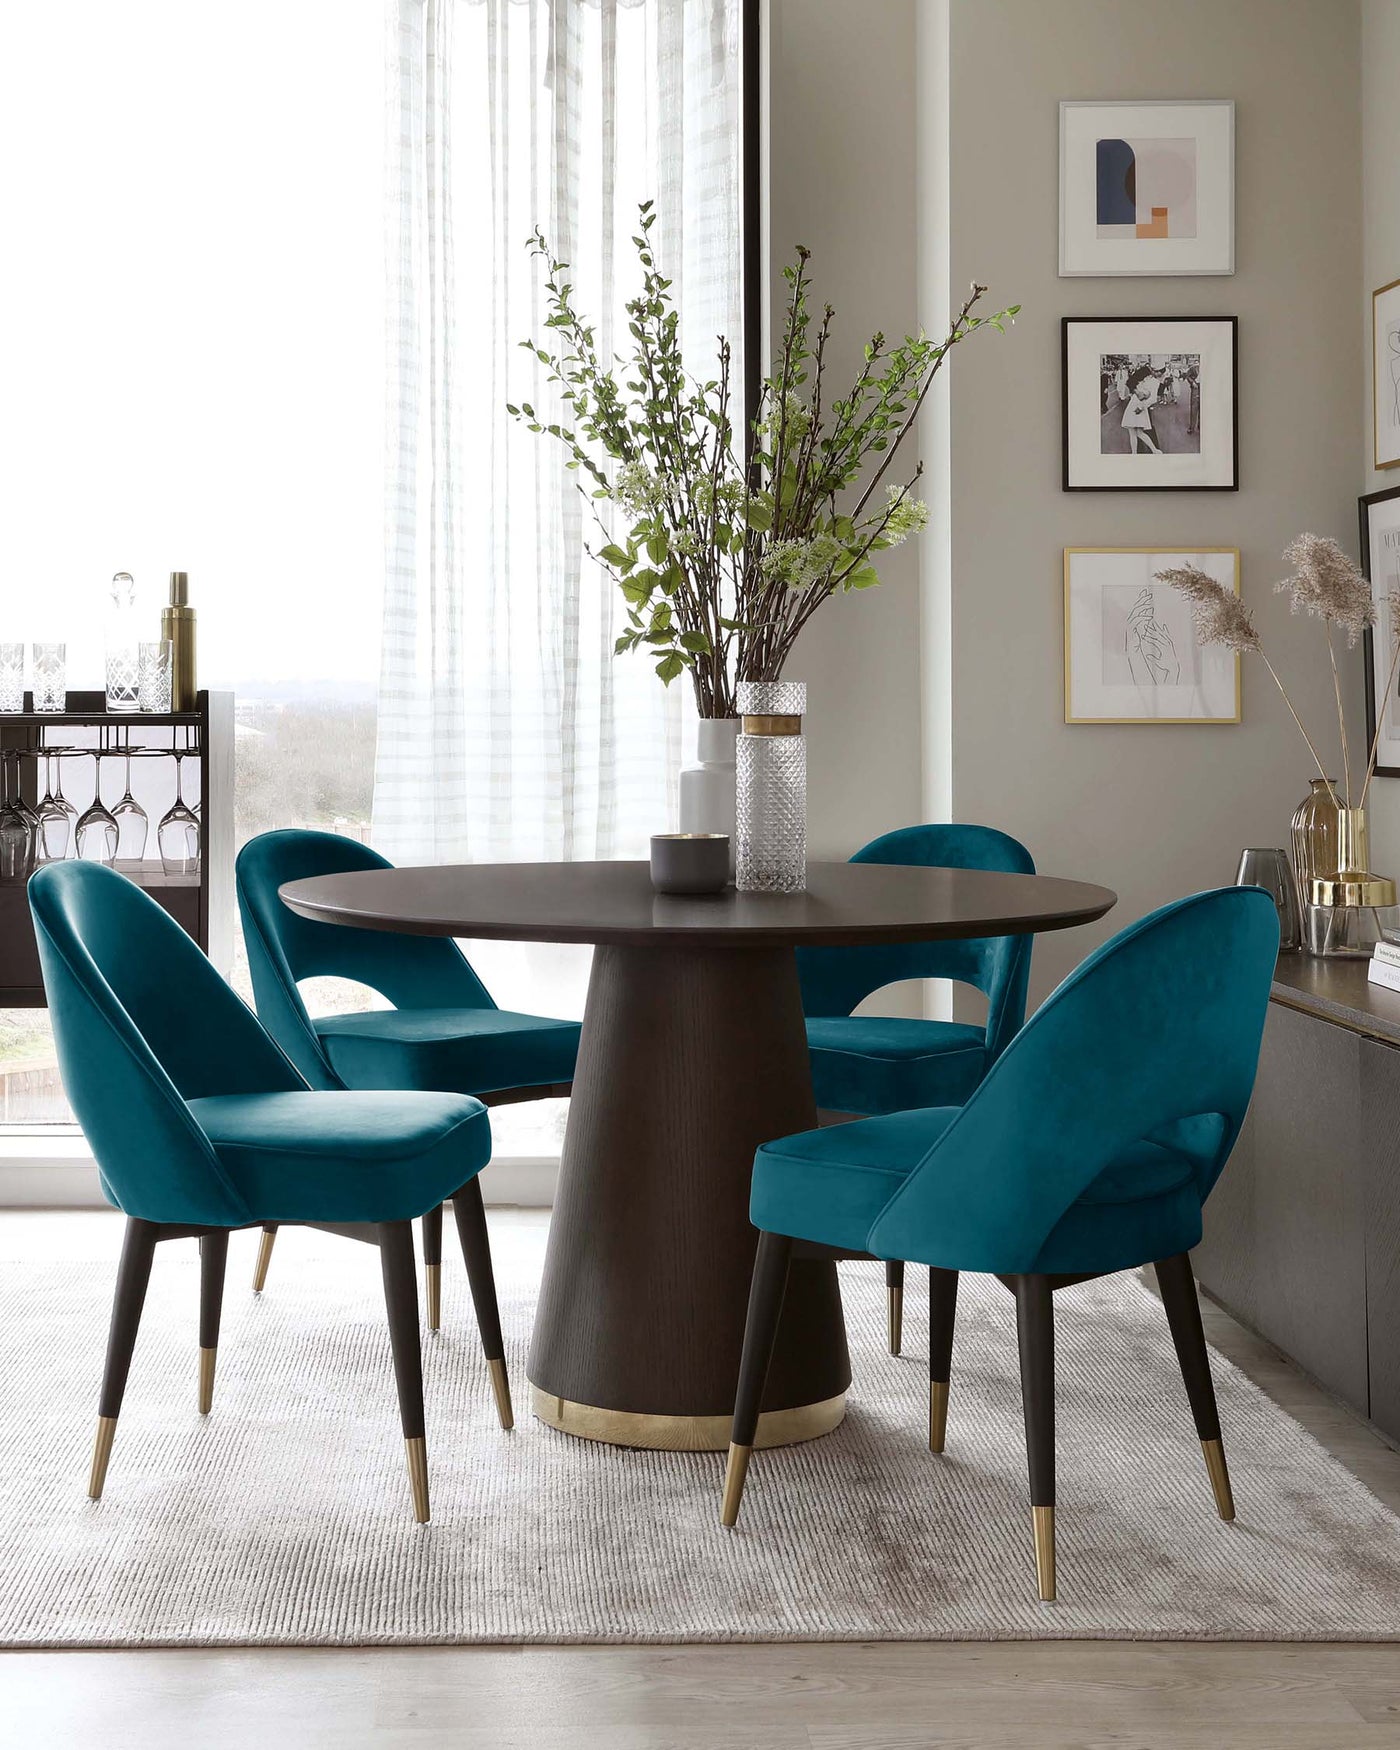 A modern dining set featuring a round, dark wooden table with a tapered base accented with a gold-coloured band at the bottom. Four plush velvet upholstered chairs in a rich teal colour with dark wooden legs tipped with gold-coloured accents encircle the table. The set sits atop a textured light beige rug.